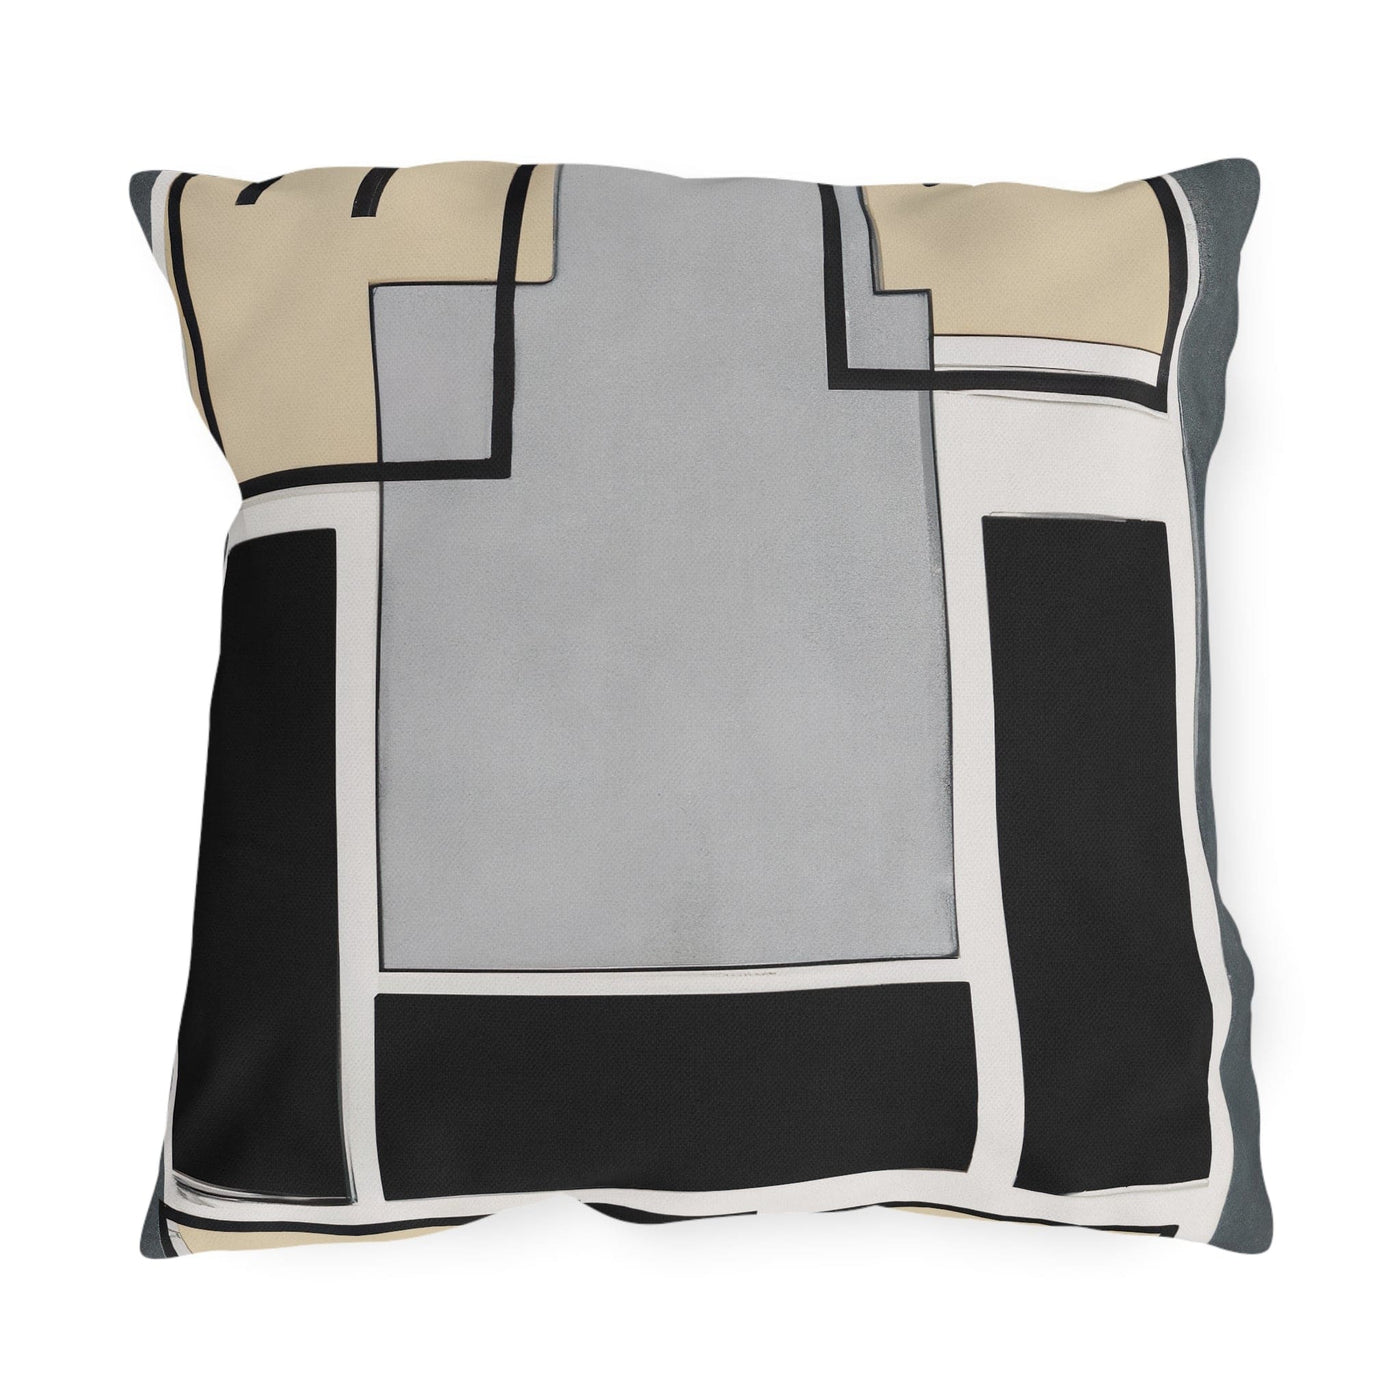 Decorative Outdoor Pillows With Zipper - Set Of 2 Abstract Black Grey Brown